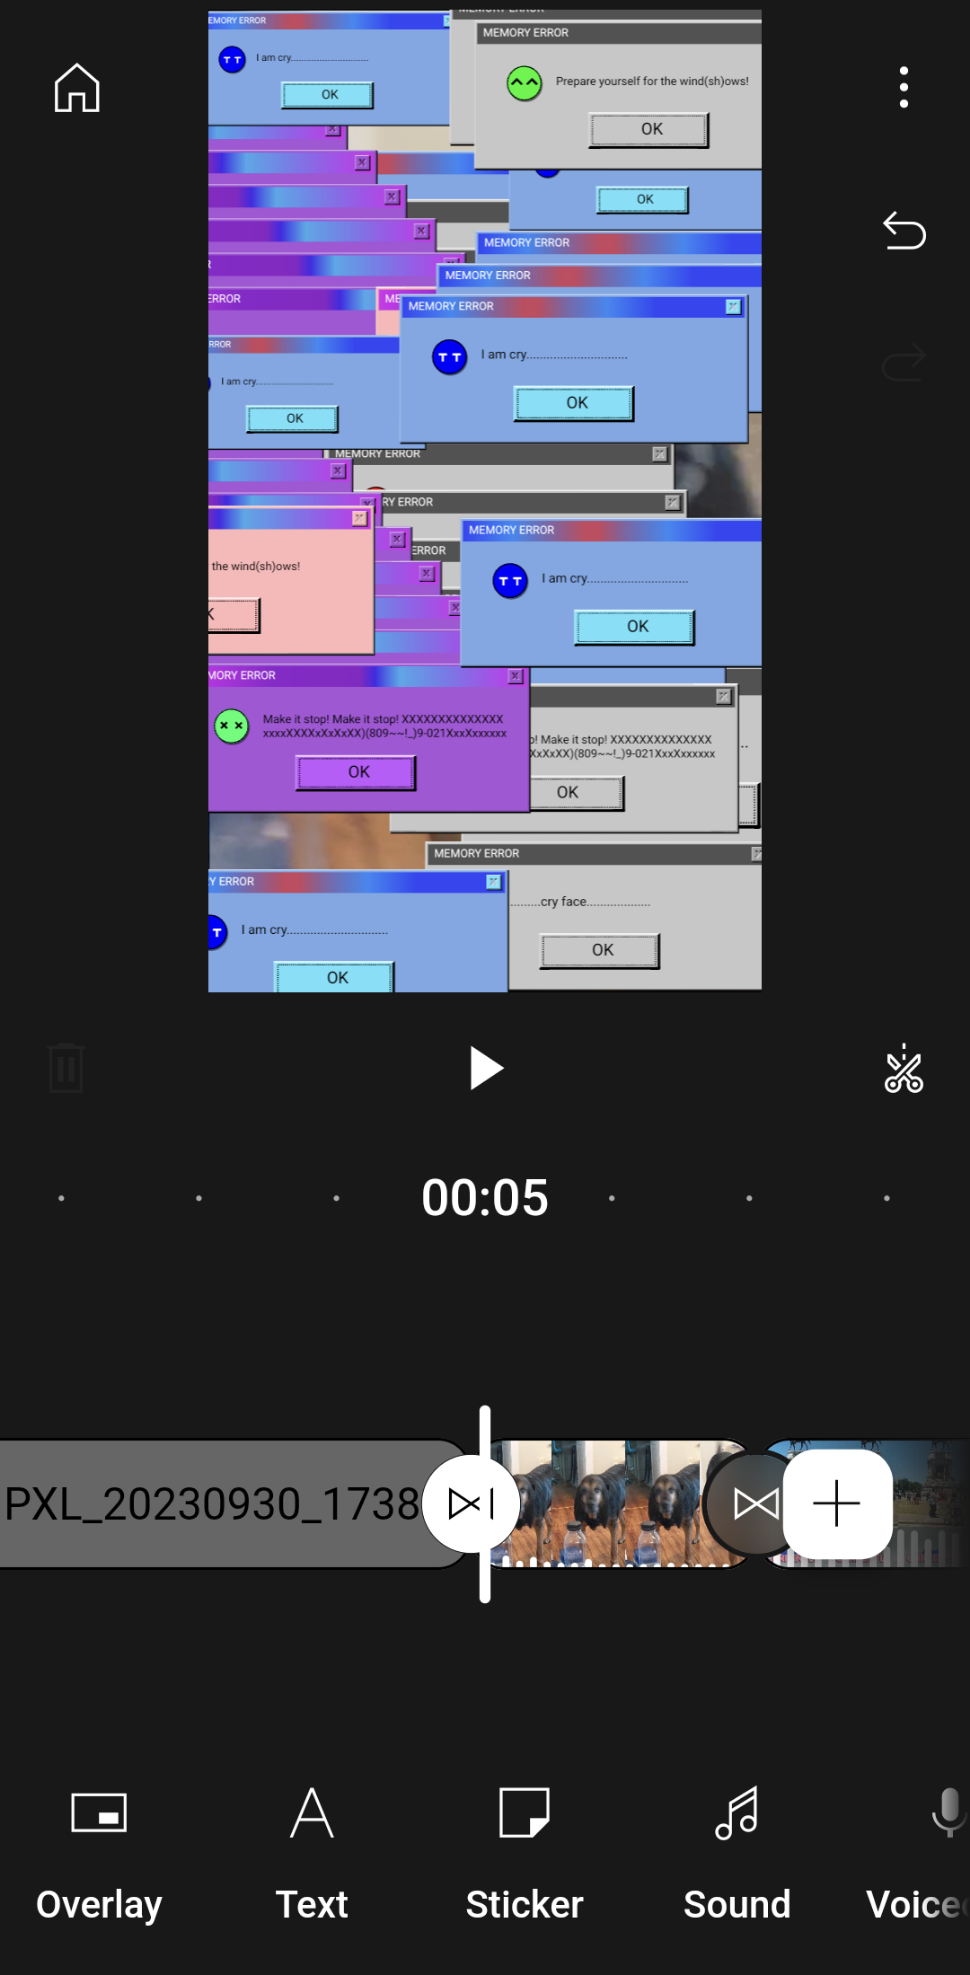 How to Use the YouTube Create App